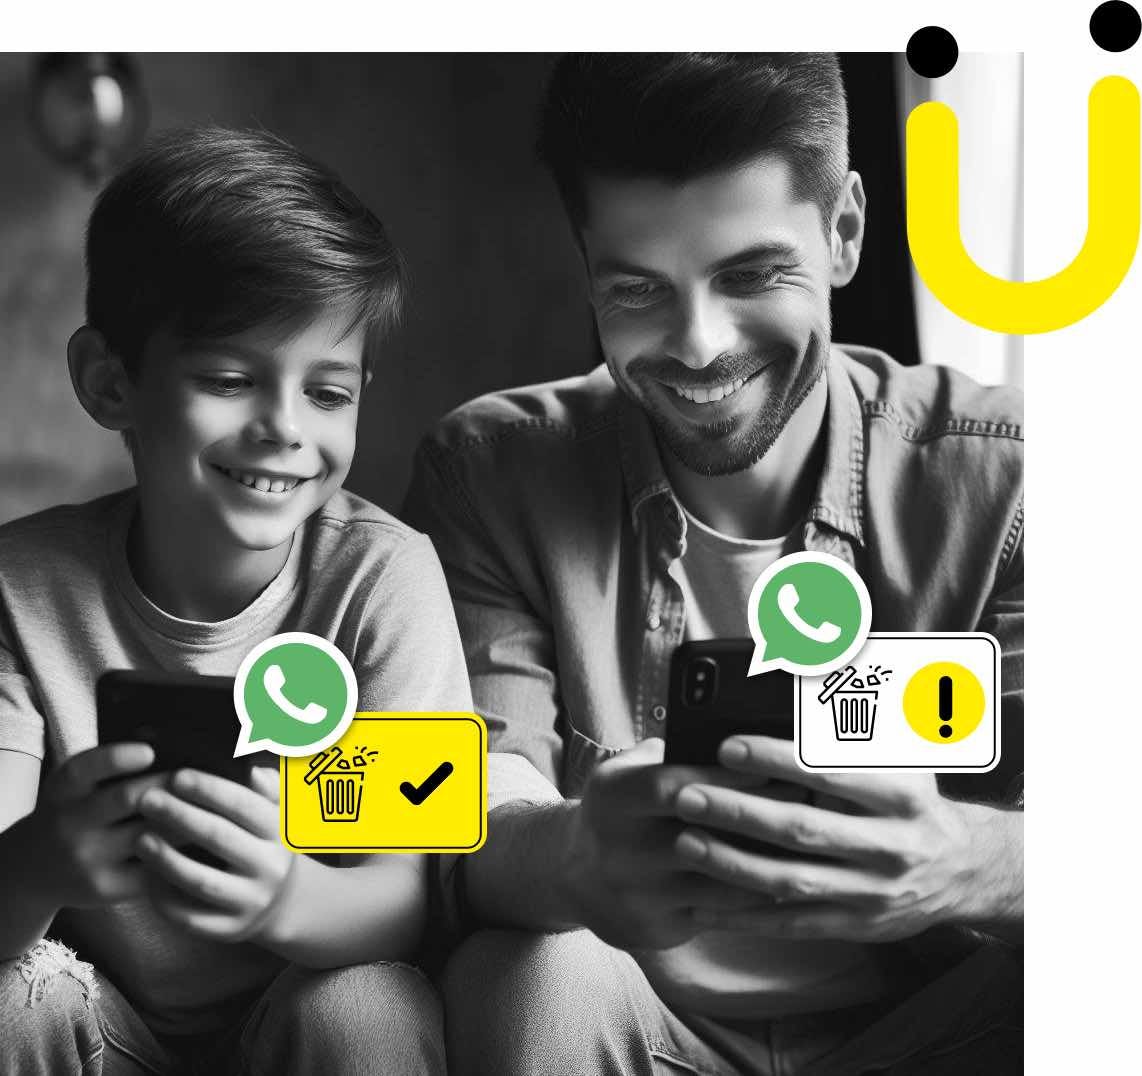 Gamification and Parenting: My Journey with WhatsAppWell to Instill Healthy Habits